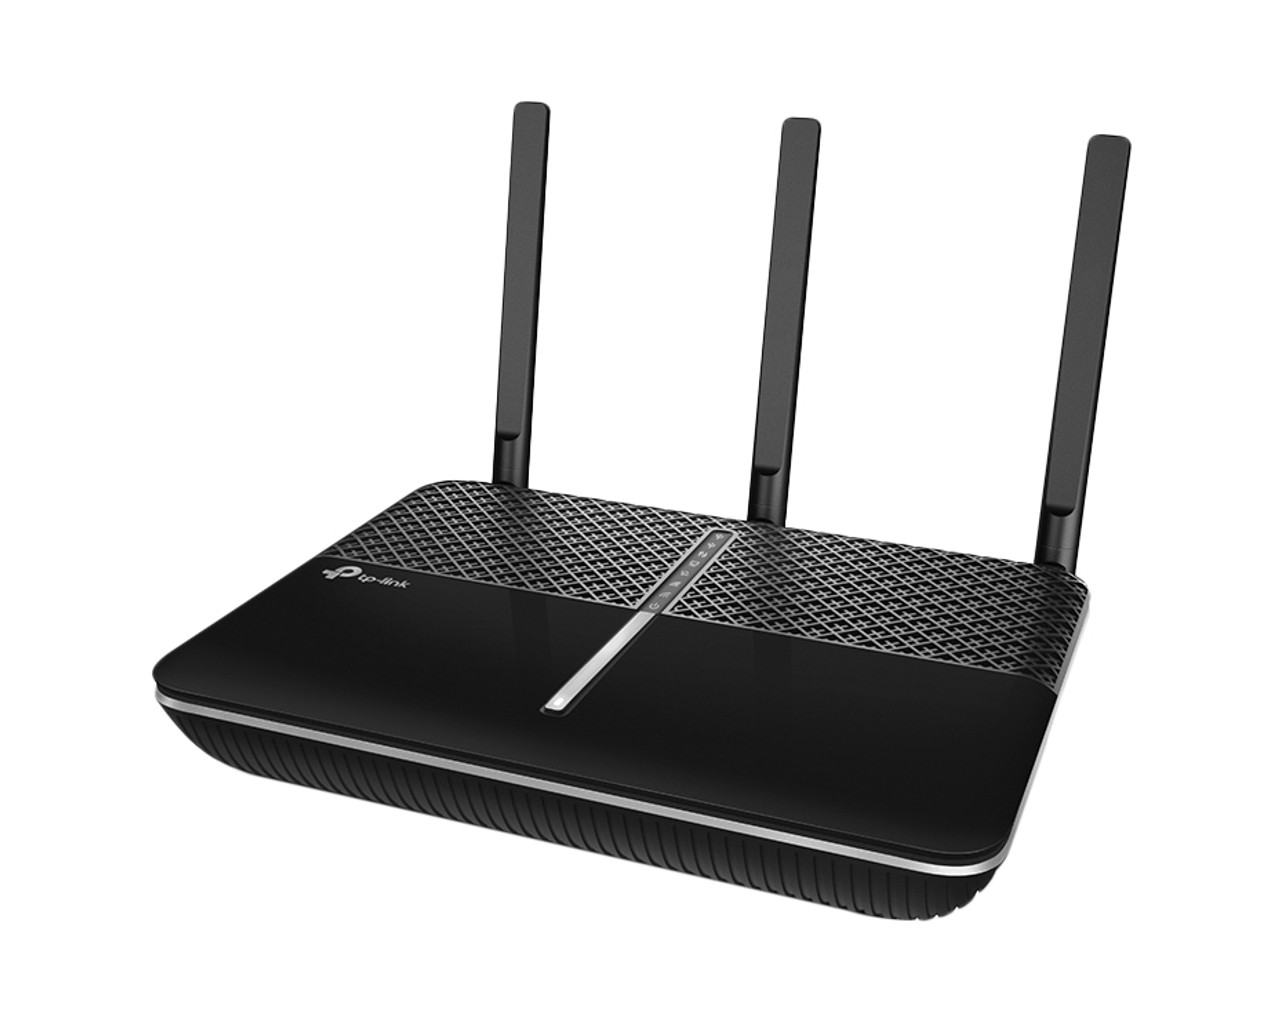 TP-LINK AC2300 Dual-Band Dual-band (2.4 GHz / 5 GHz) Gigabit Ethernet Black wireless router